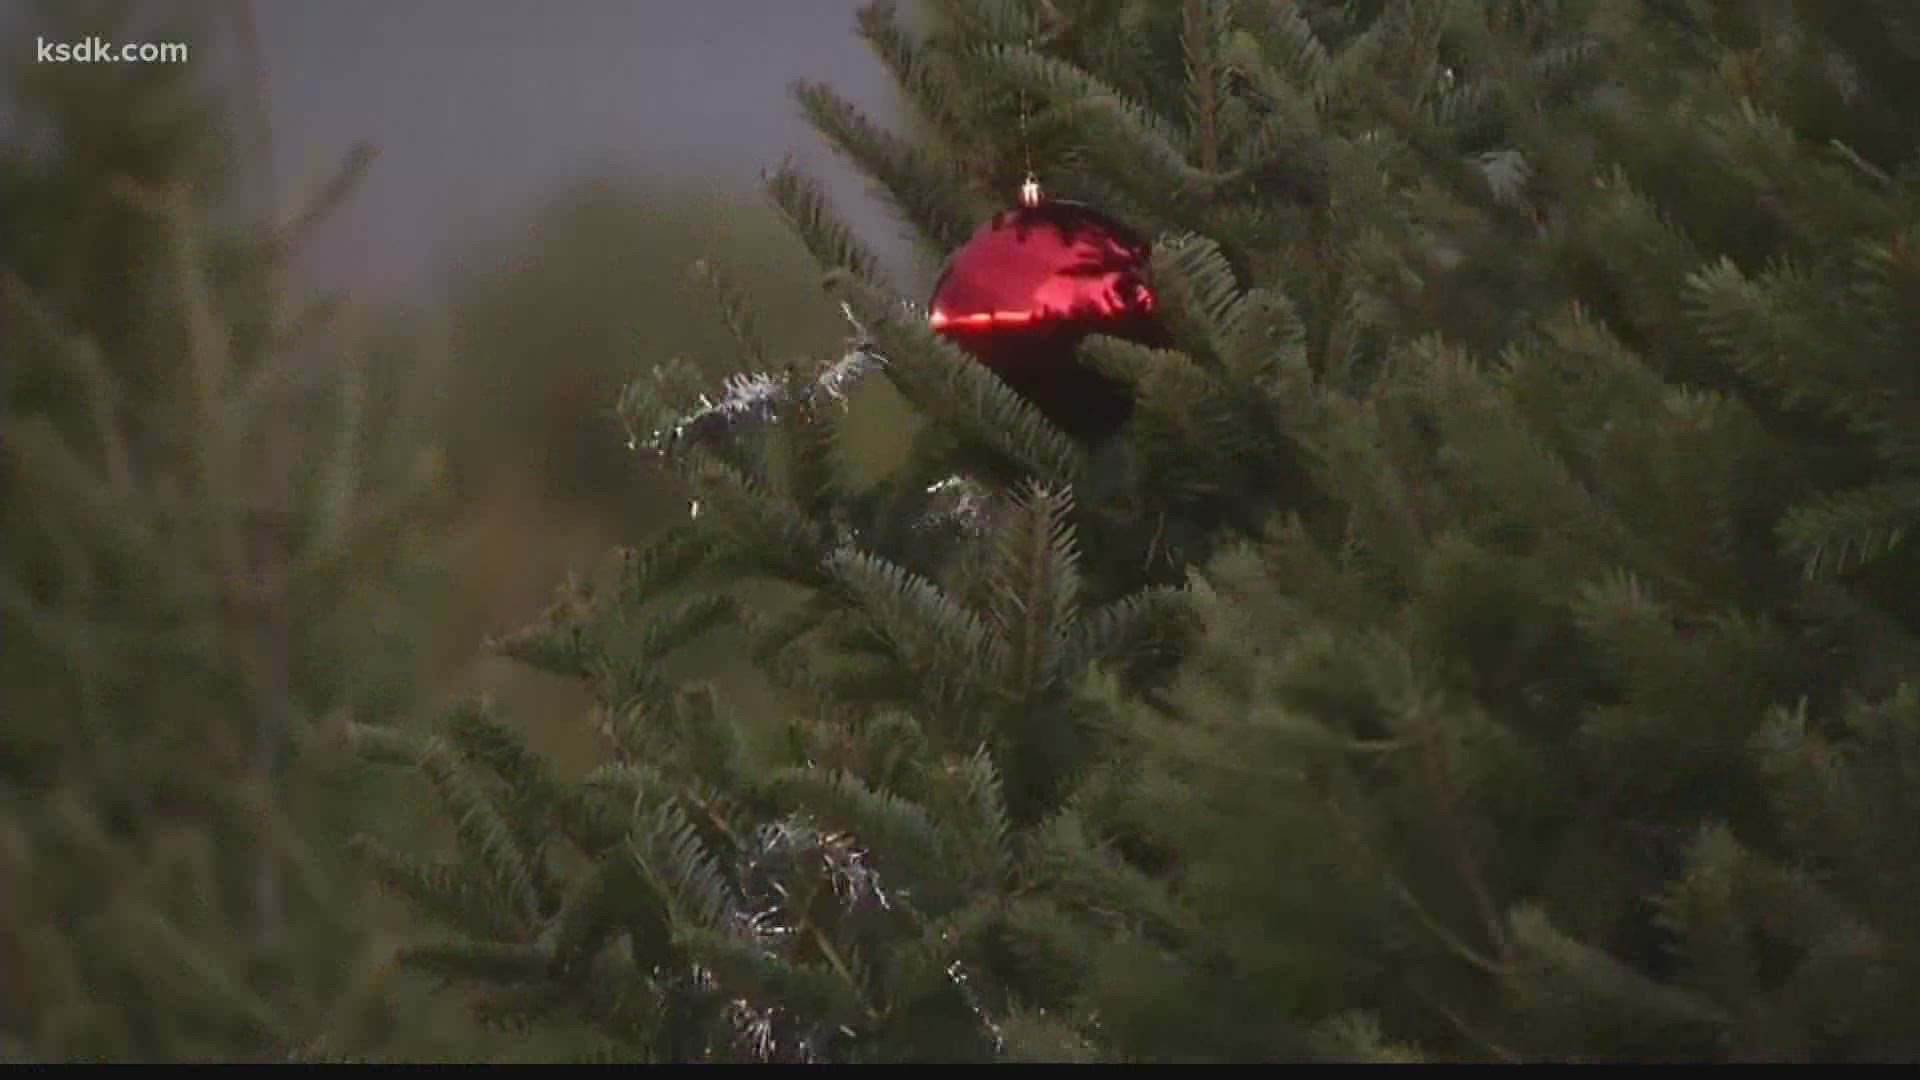 Apparently, many people are choosing to ditch their artificial trees and decorate early